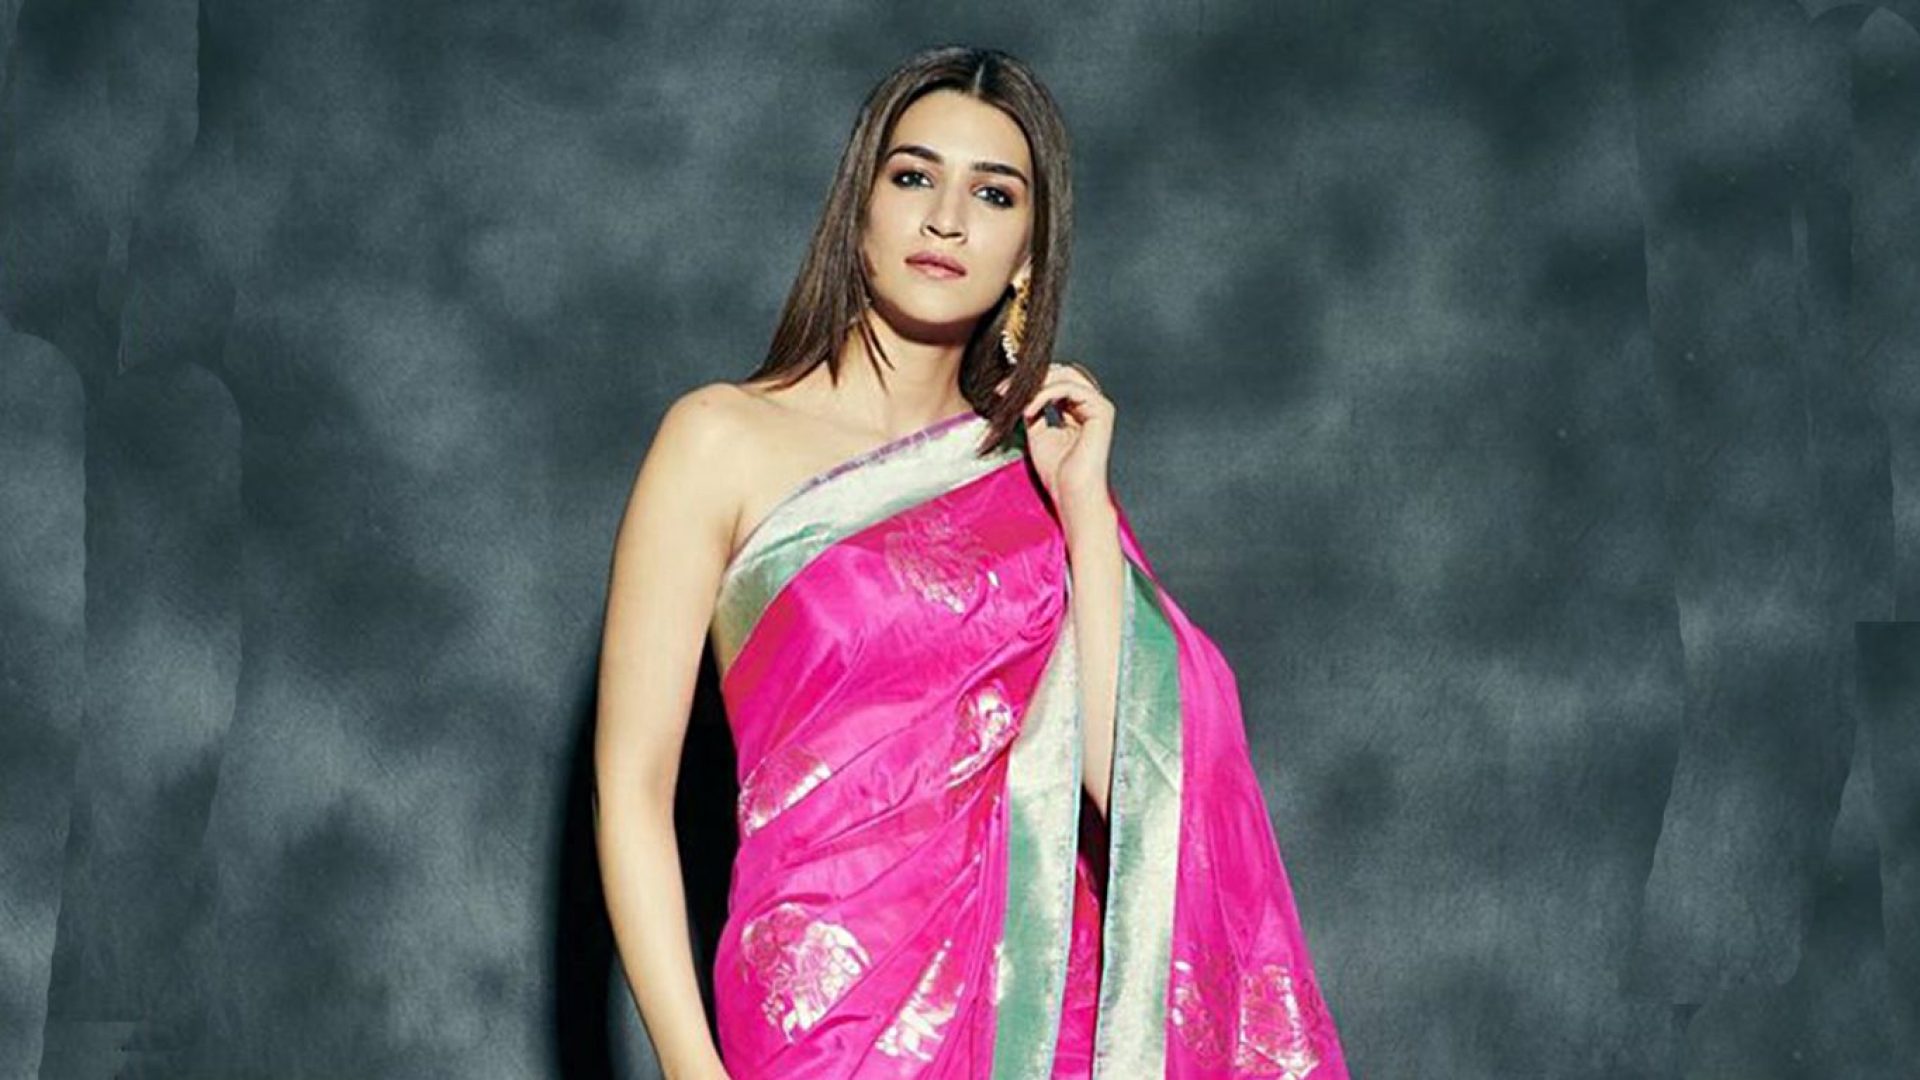 designer saris in Kriti Sanon's collection that prove she isn't afraid to experiment